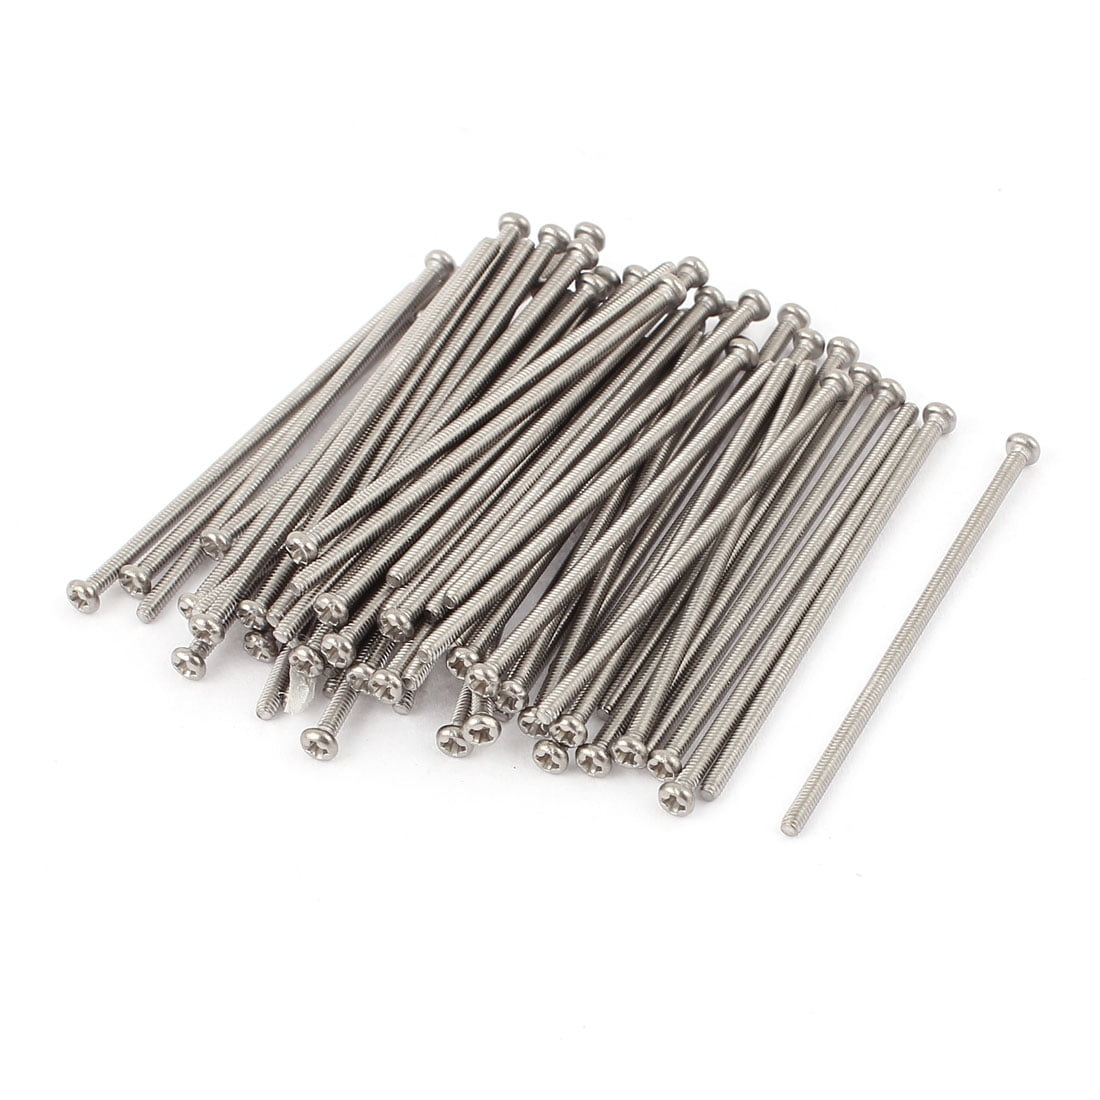 STAINLESS STEEL POLY HEADED PINS & NAILS 50mm ANTHRACITE GREY POLYMER  HEADED NAILS (STAINLESS STEEL) - Brighton Tools